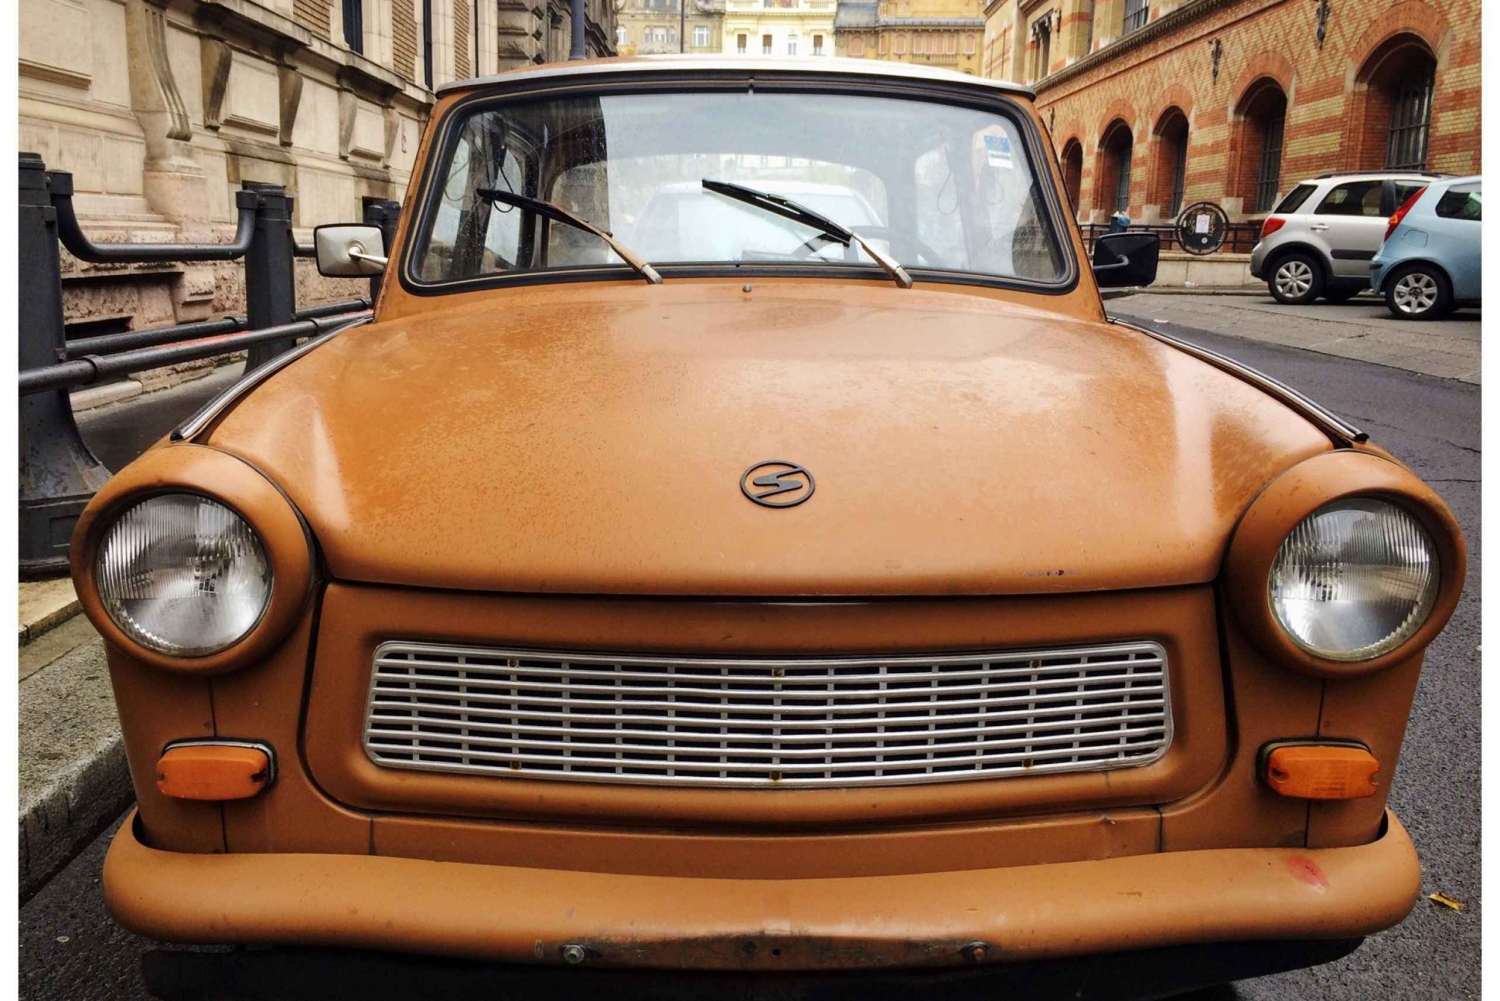 Trabant Transfer to Memento Park with Guided Tour